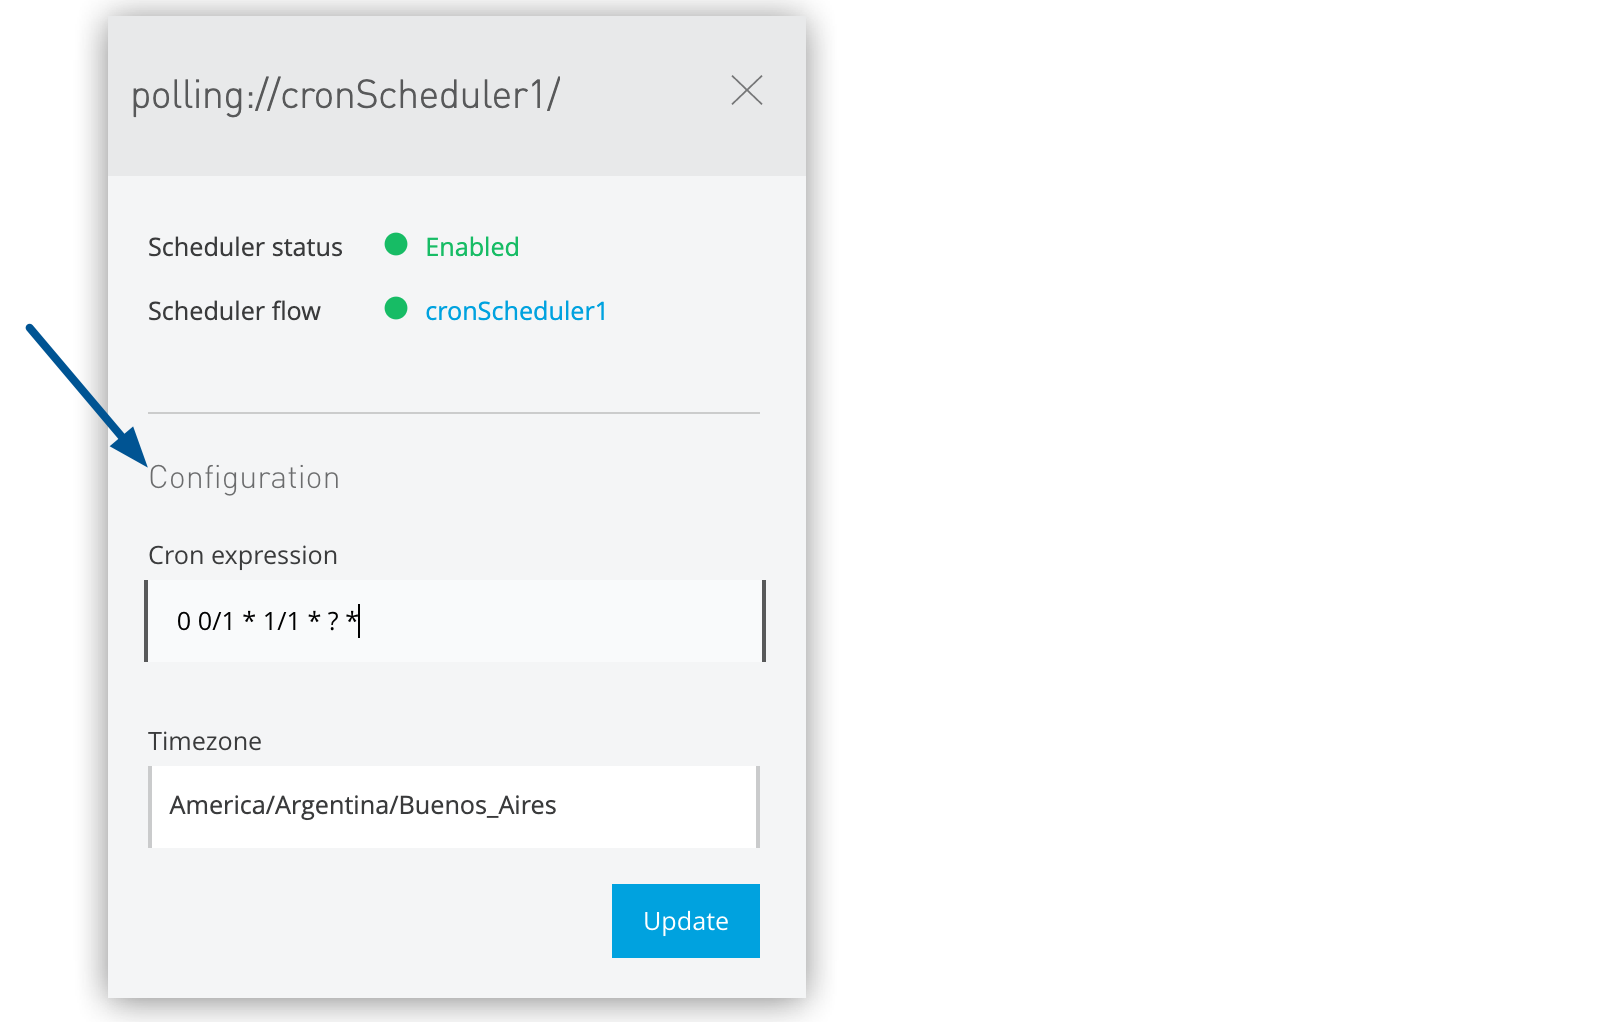 Schedule configuration in the details pane